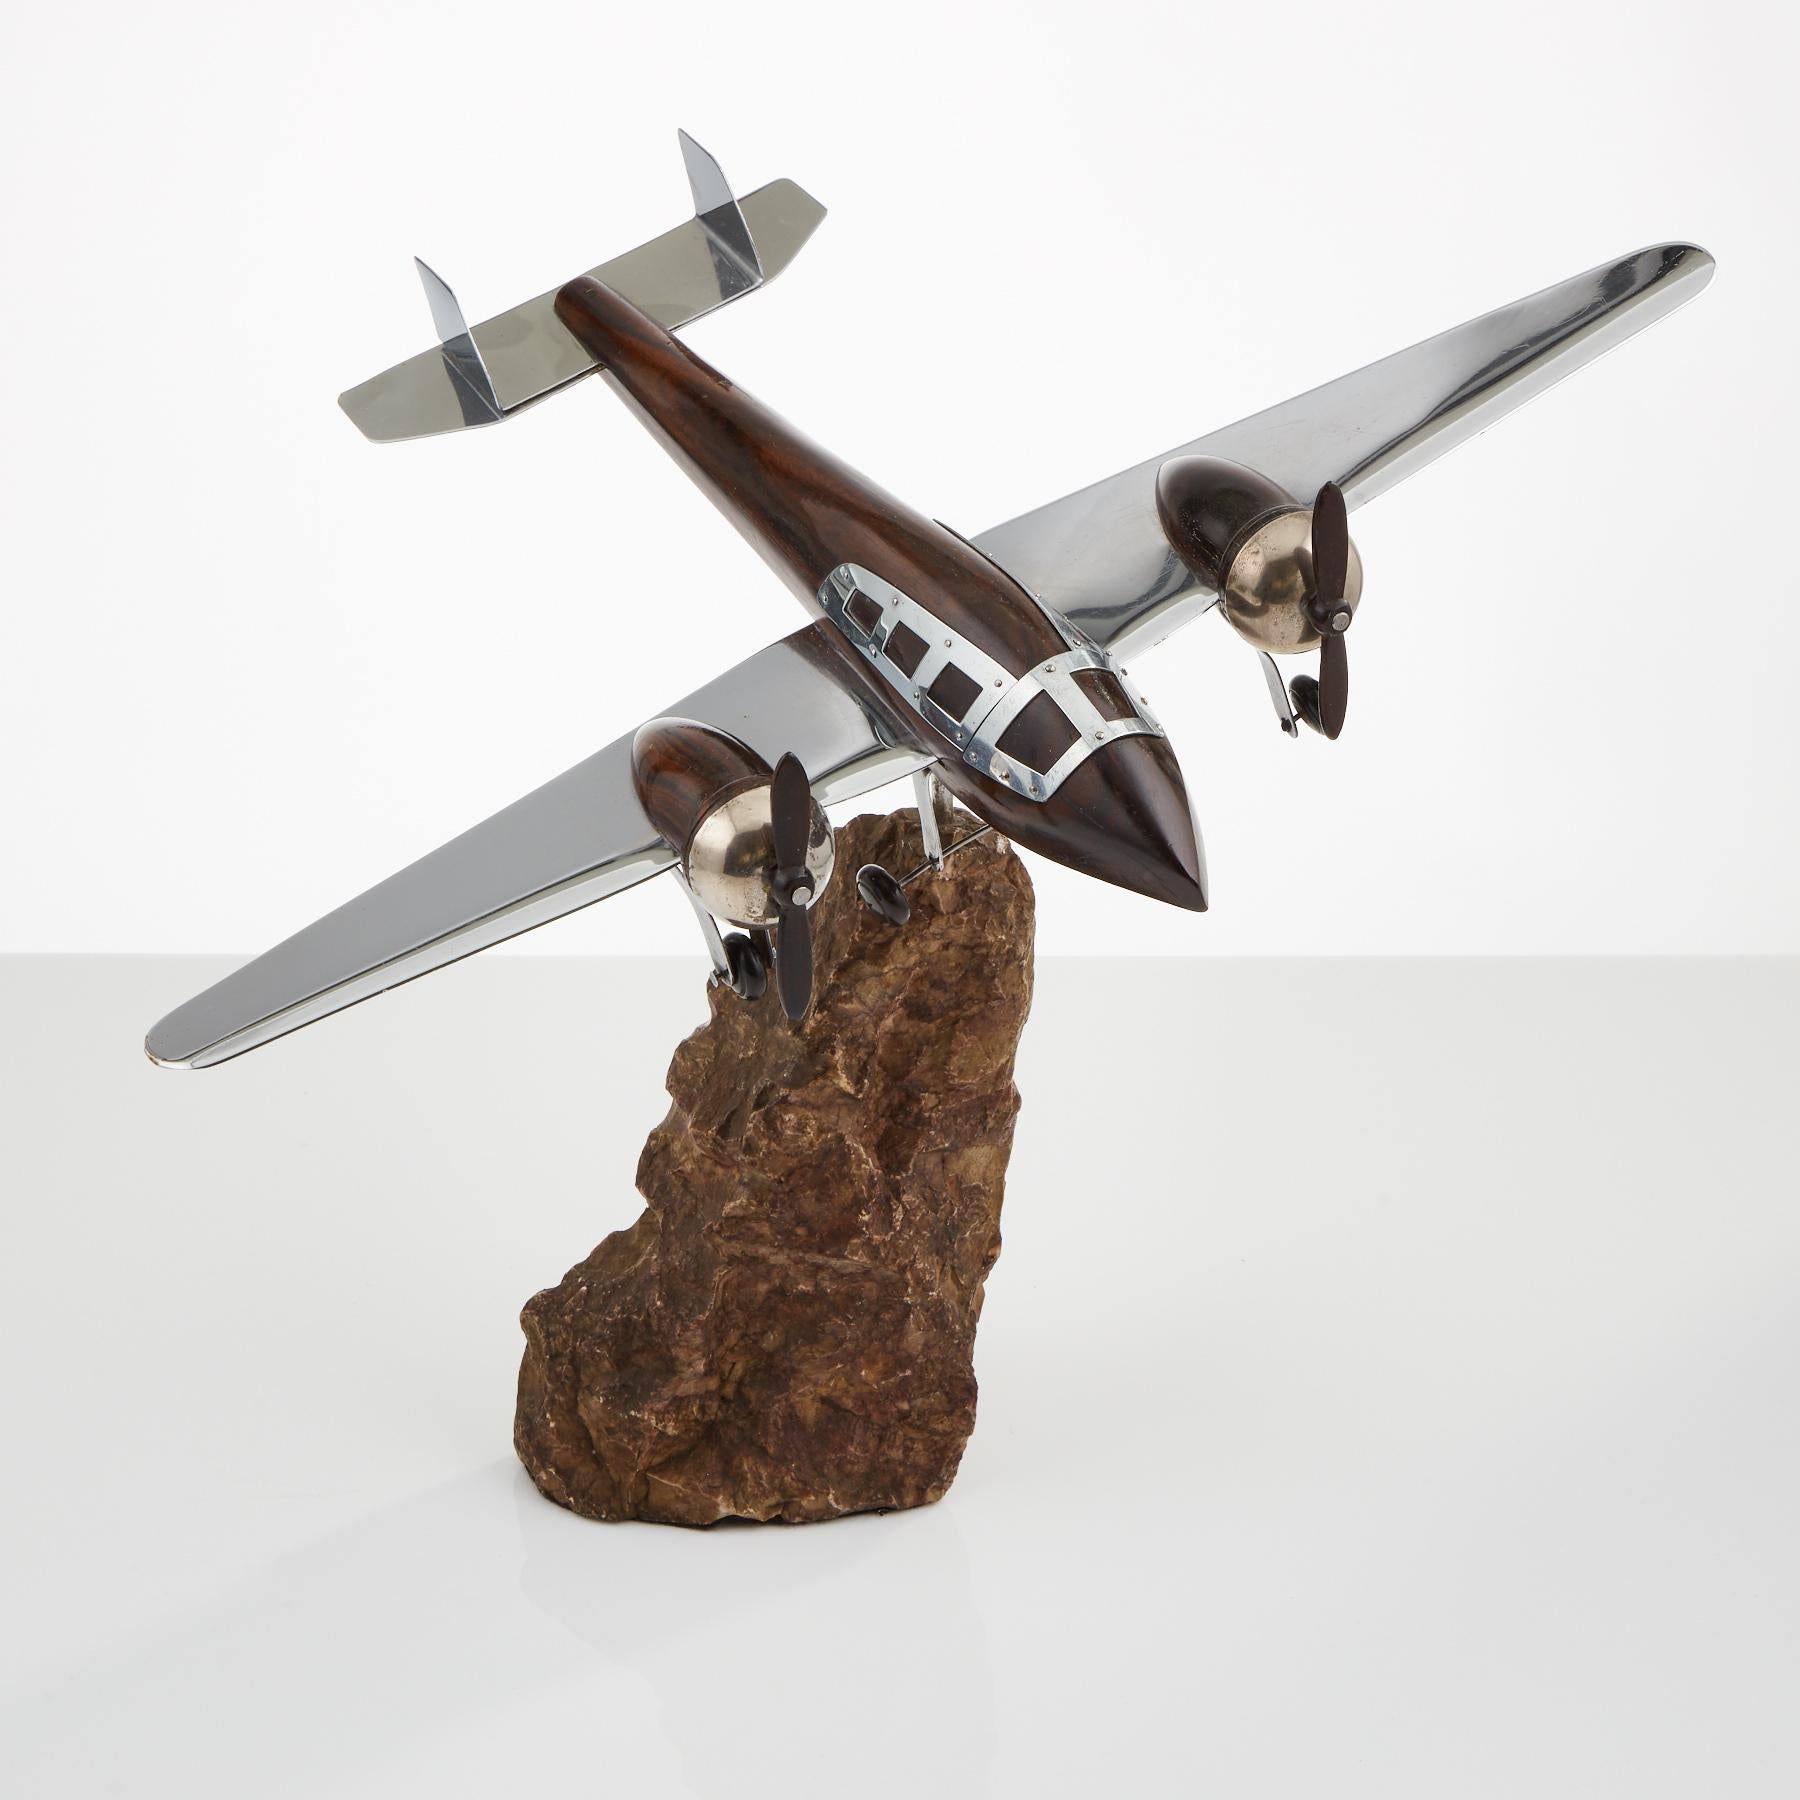 A unusual French Art Deco model of an aircraft, circa 1940.
The body, engine casing & propellers are made of Macassar wood. 
The wings, tail & cockpit are metal with a chrome finish. 
The rocky display base appears to be granite & the plane is